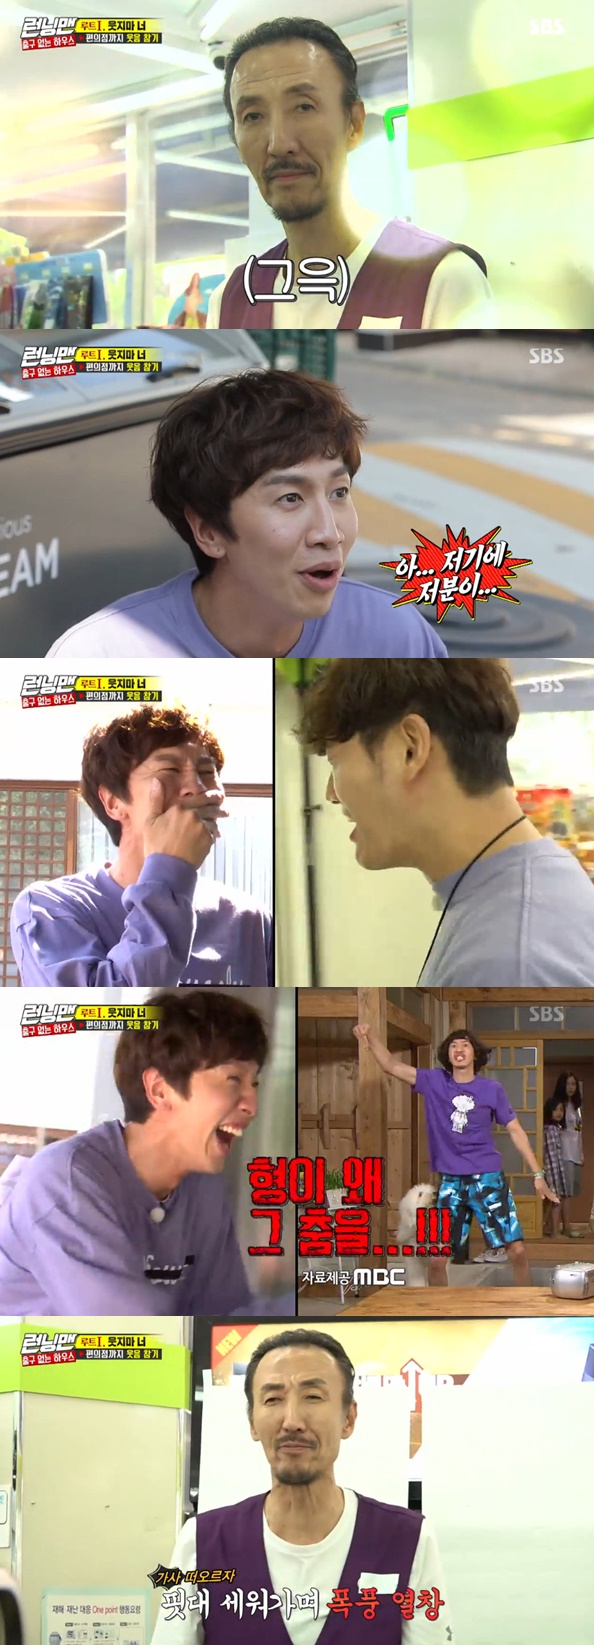 Running Man Lee Kwang-soo failed to commission the appearance of One more example.On the 20th, SBS entertainment program Running Man, the members Do not laugh was conducted.Lee Kwang-soo and Kim Jong-kook together challenged for a laugh-holding mission, arriving at the last venue, the Convenience store.There was a former basketball player One more example in the Convenience store, and Lee Kwang-soo immediately laughed.This is a foul, why is he coming out there? Kim Jong-kook went into the Convenience store and continued his mission.He also laughed at the dance of One more example and succeeded in the 5th stage mission.Kim Jong-kook said, Why is that brother there? I thought he was going to die because he was running with water.